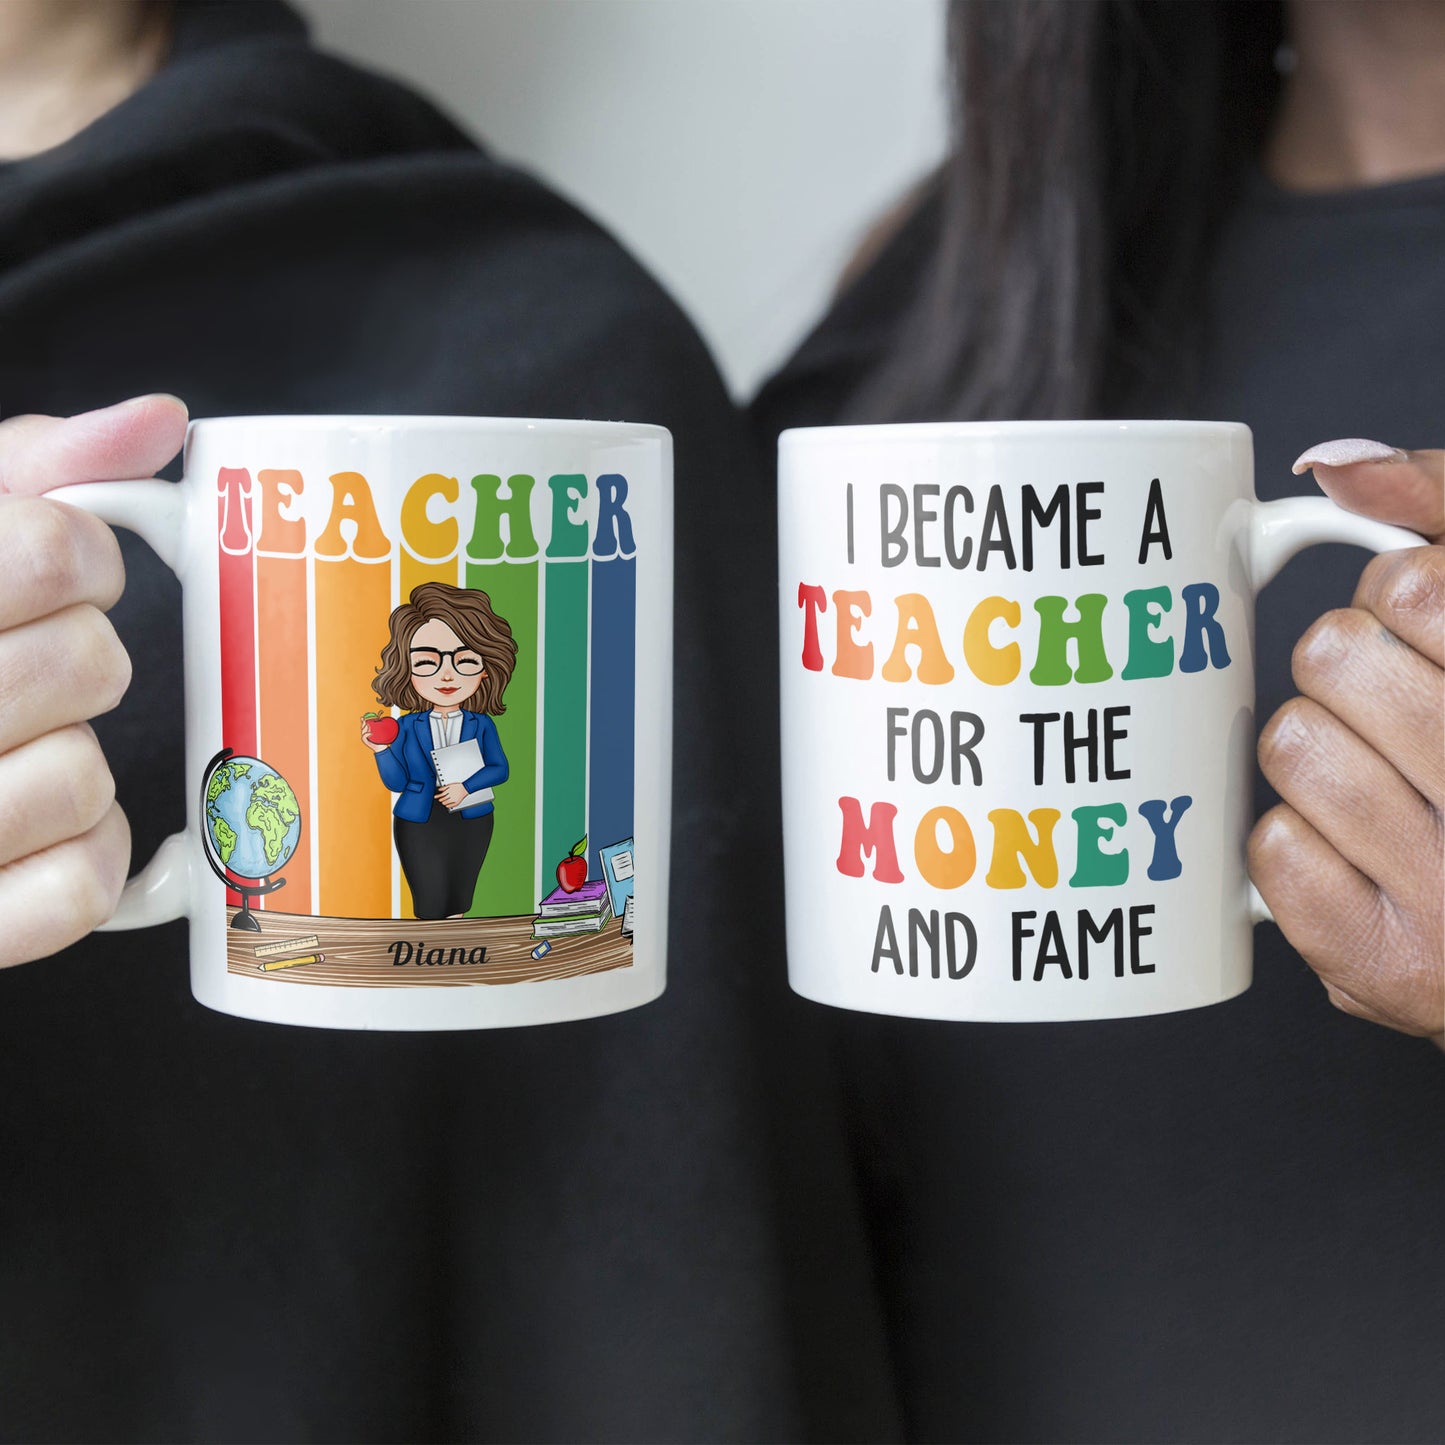 Funny I Became A Teacher For The Money And Fame - Personalized Mug